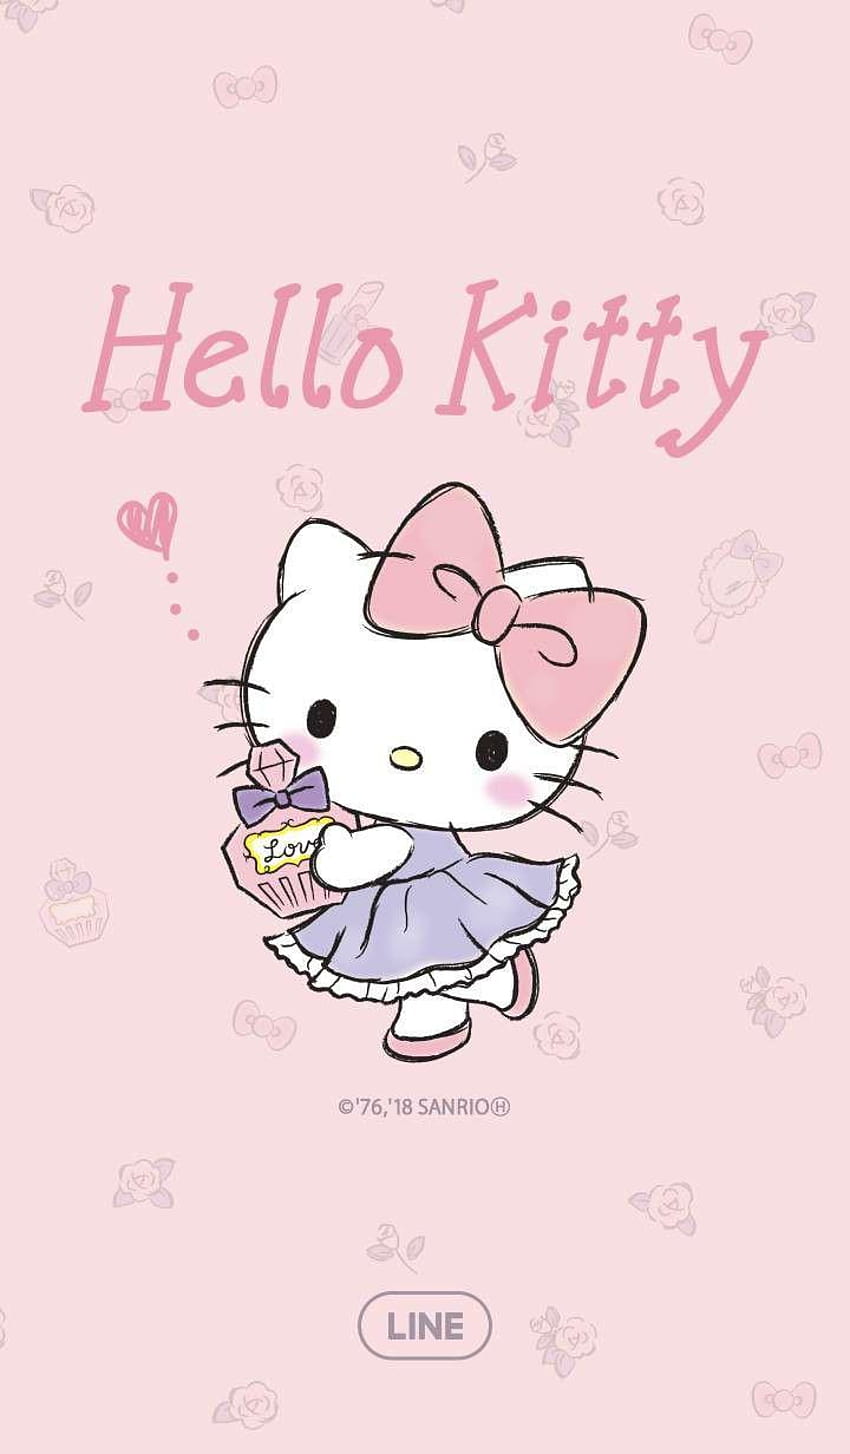 The Most Beautiful Hello Kitty Images